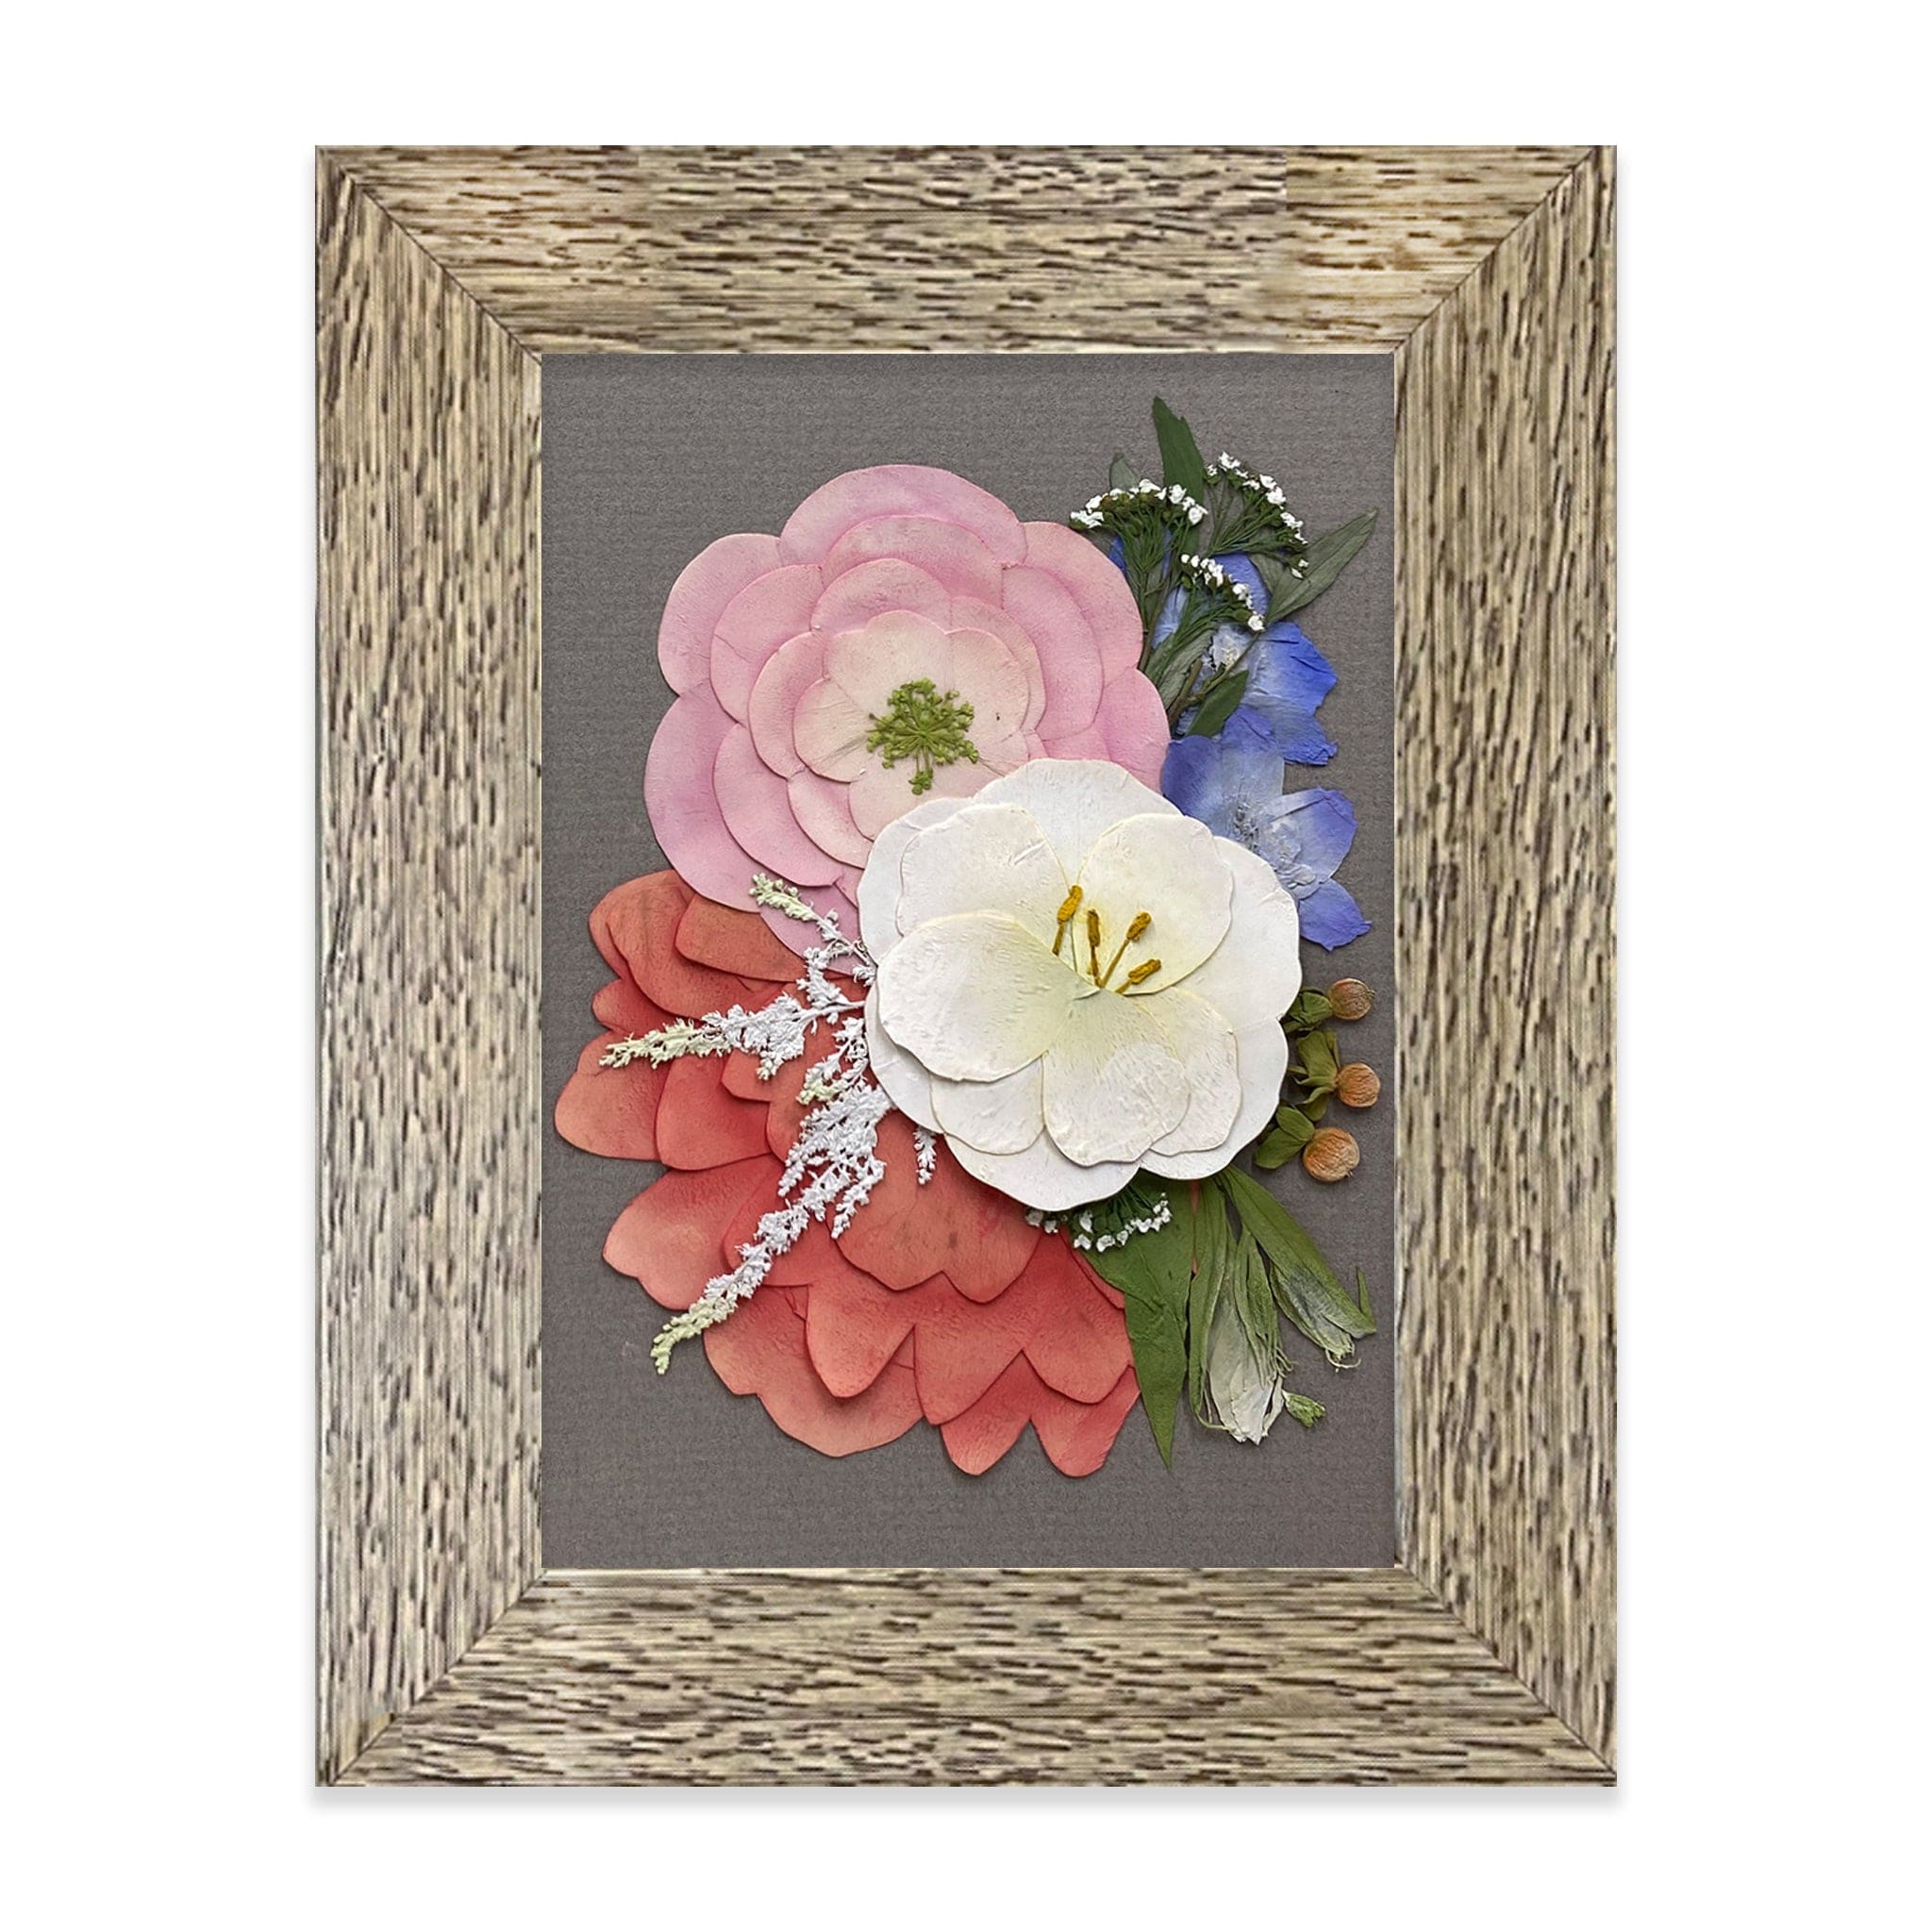 Designs by Andrea Pressed (Framed) 5" x 7" / Rectangle / Mini 5" x 7" Classic Frame